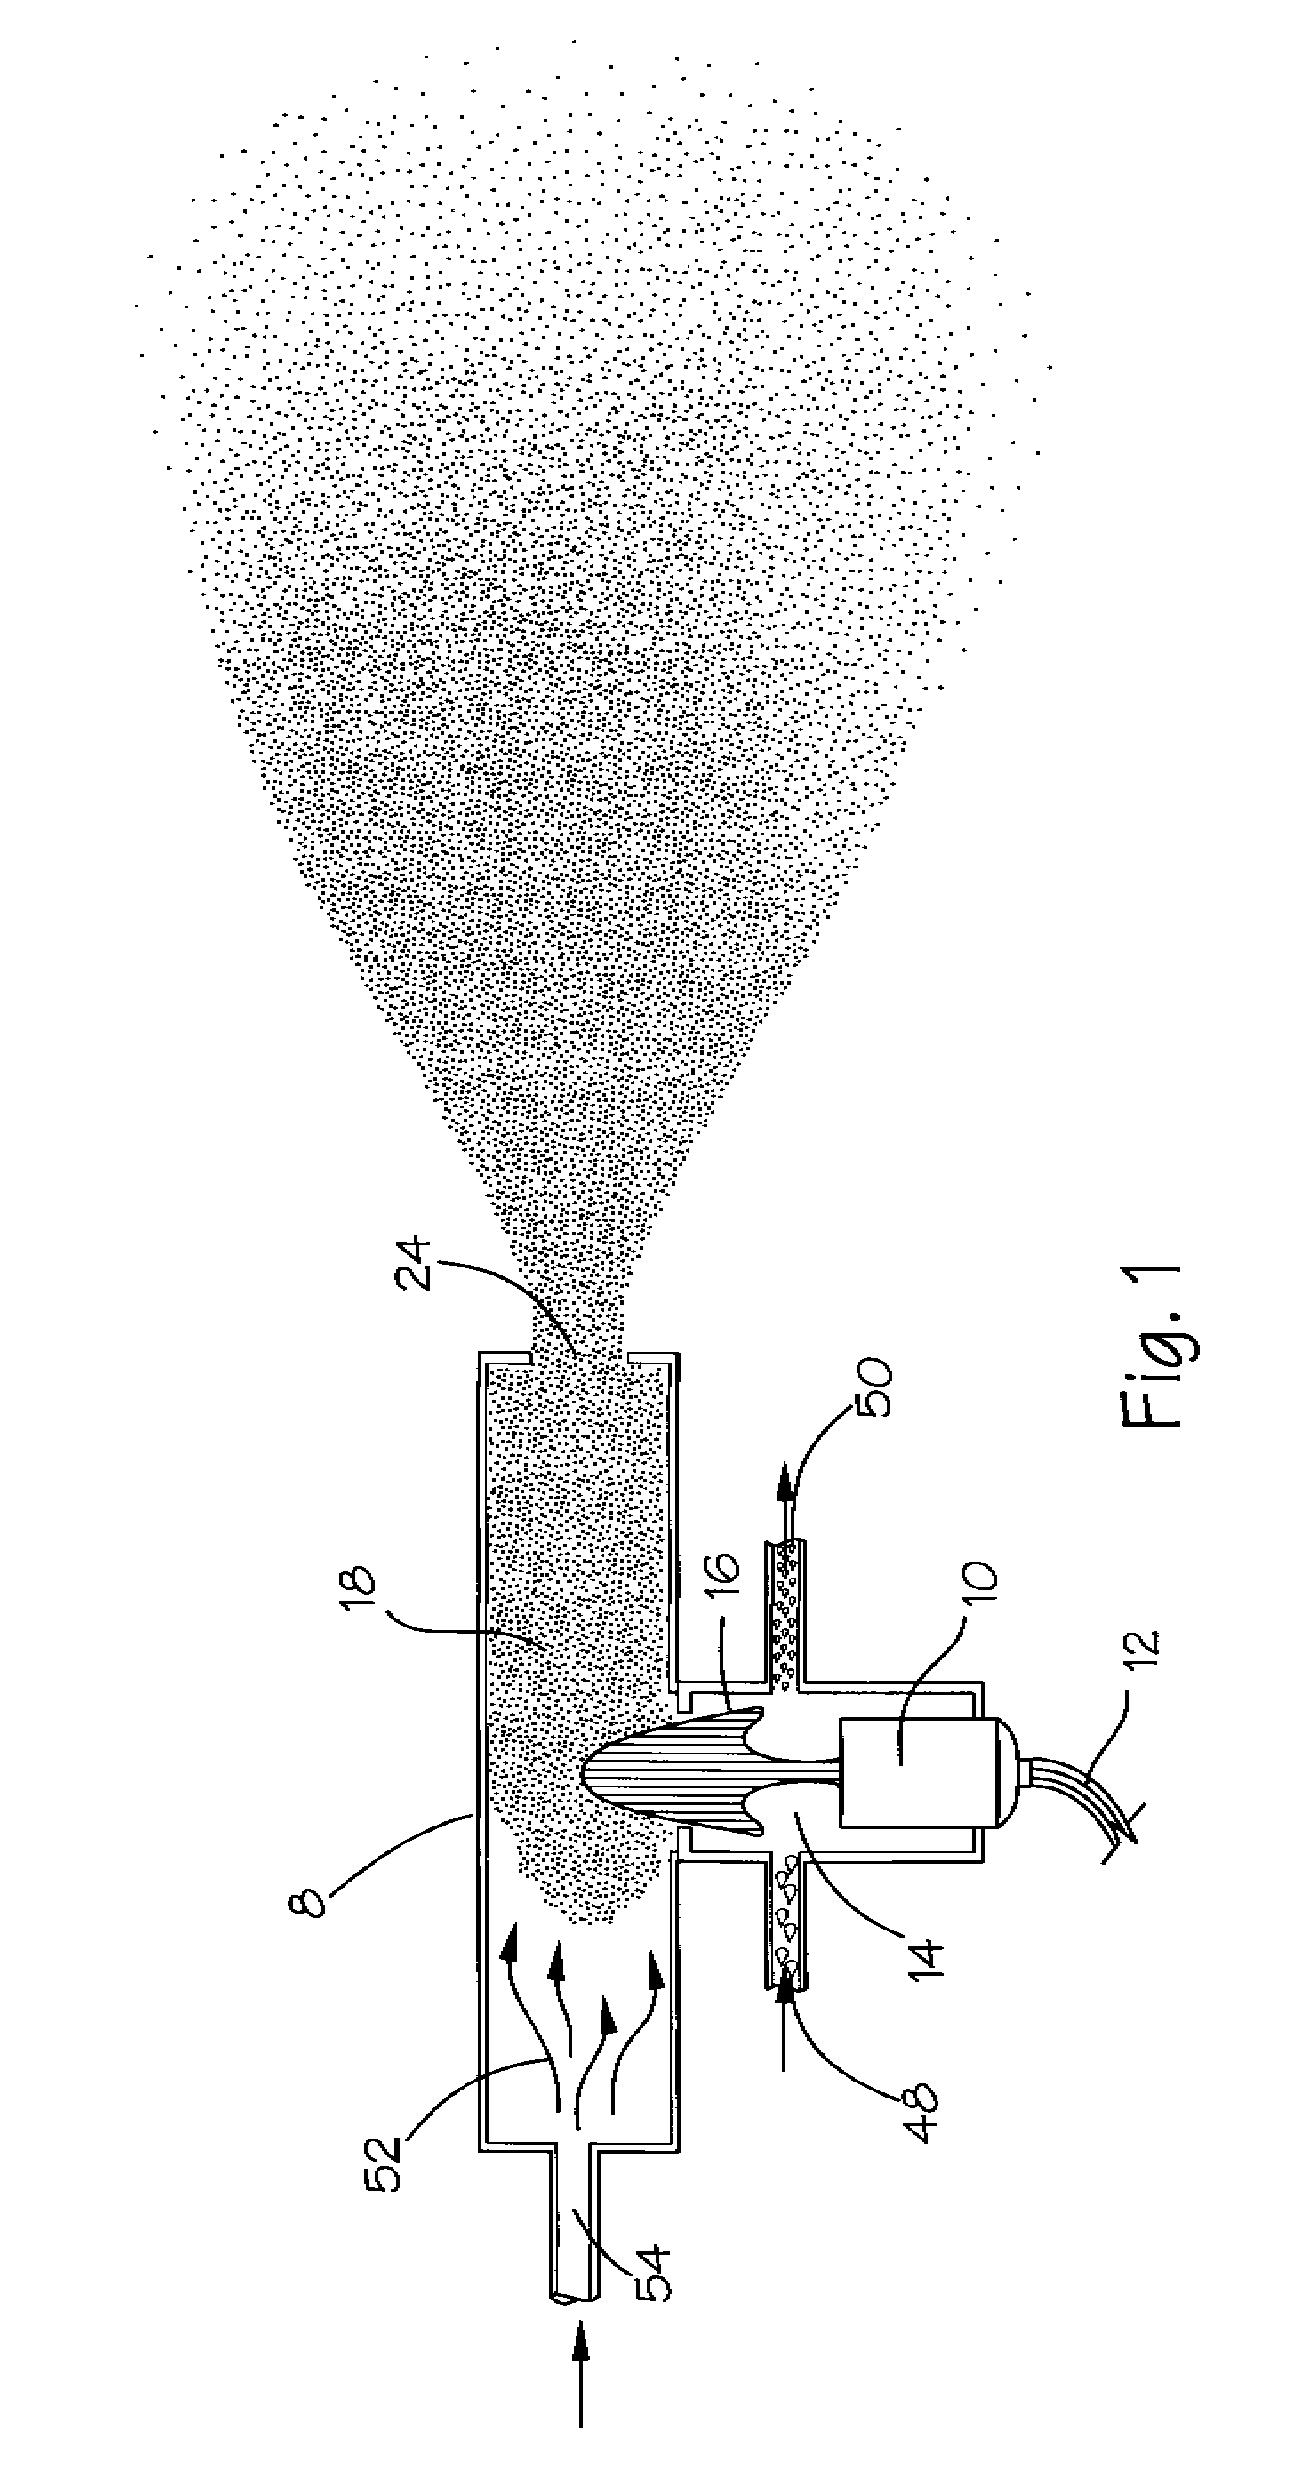 Fire Suppression Using Water Mist with Ultrafine Size Droplets